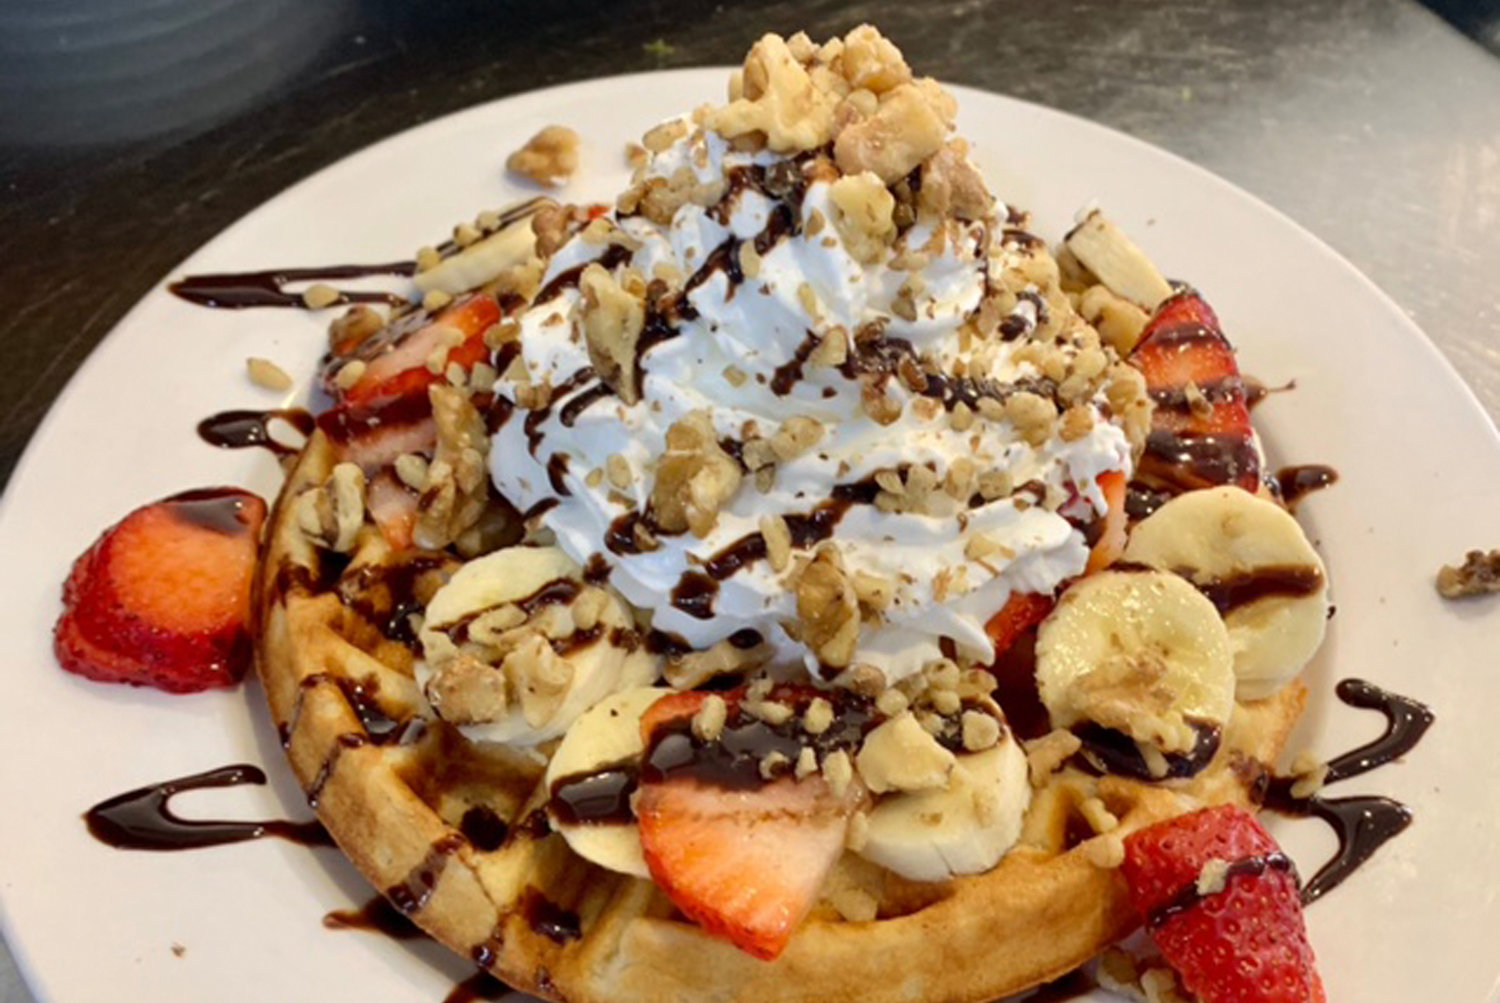 Decadent waffles are a must-try